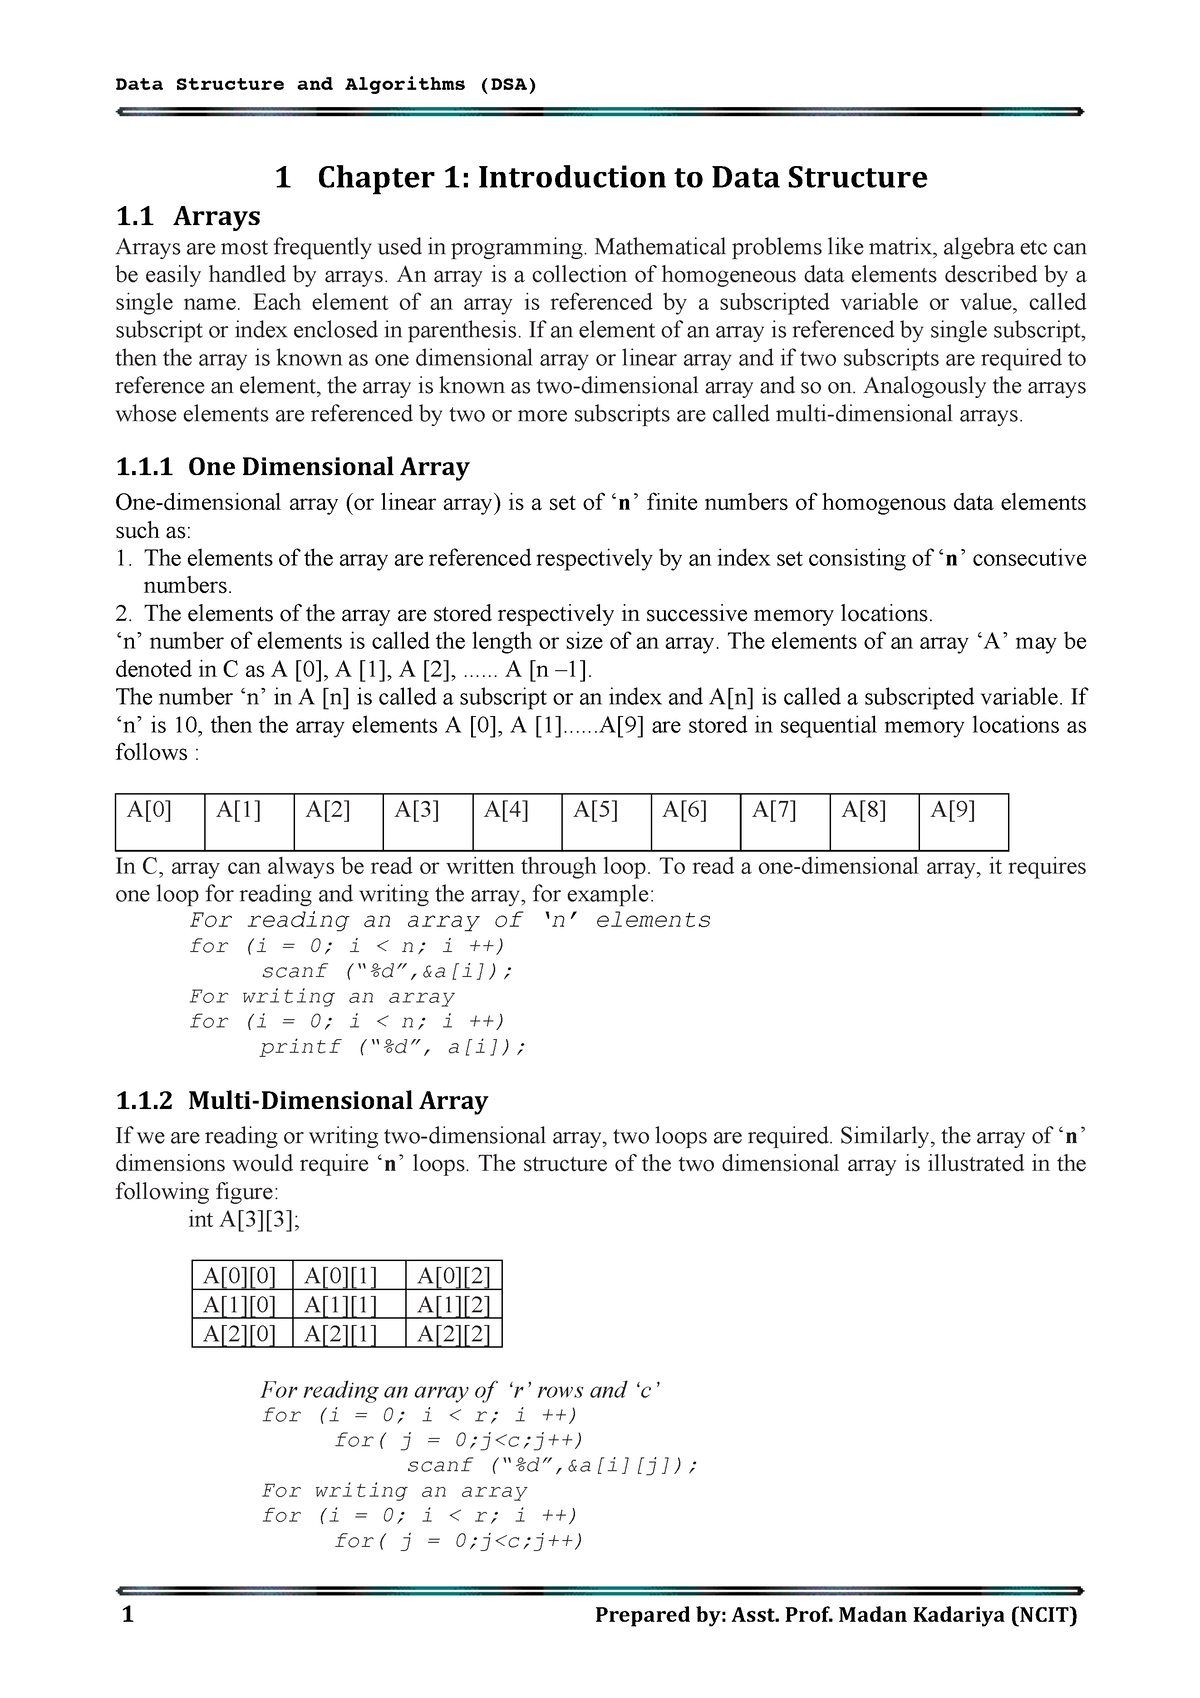 Dsa Chapter 1 Data Structures And Algorithms Lecture Notes 1 Prepared By Asst Prof Madan